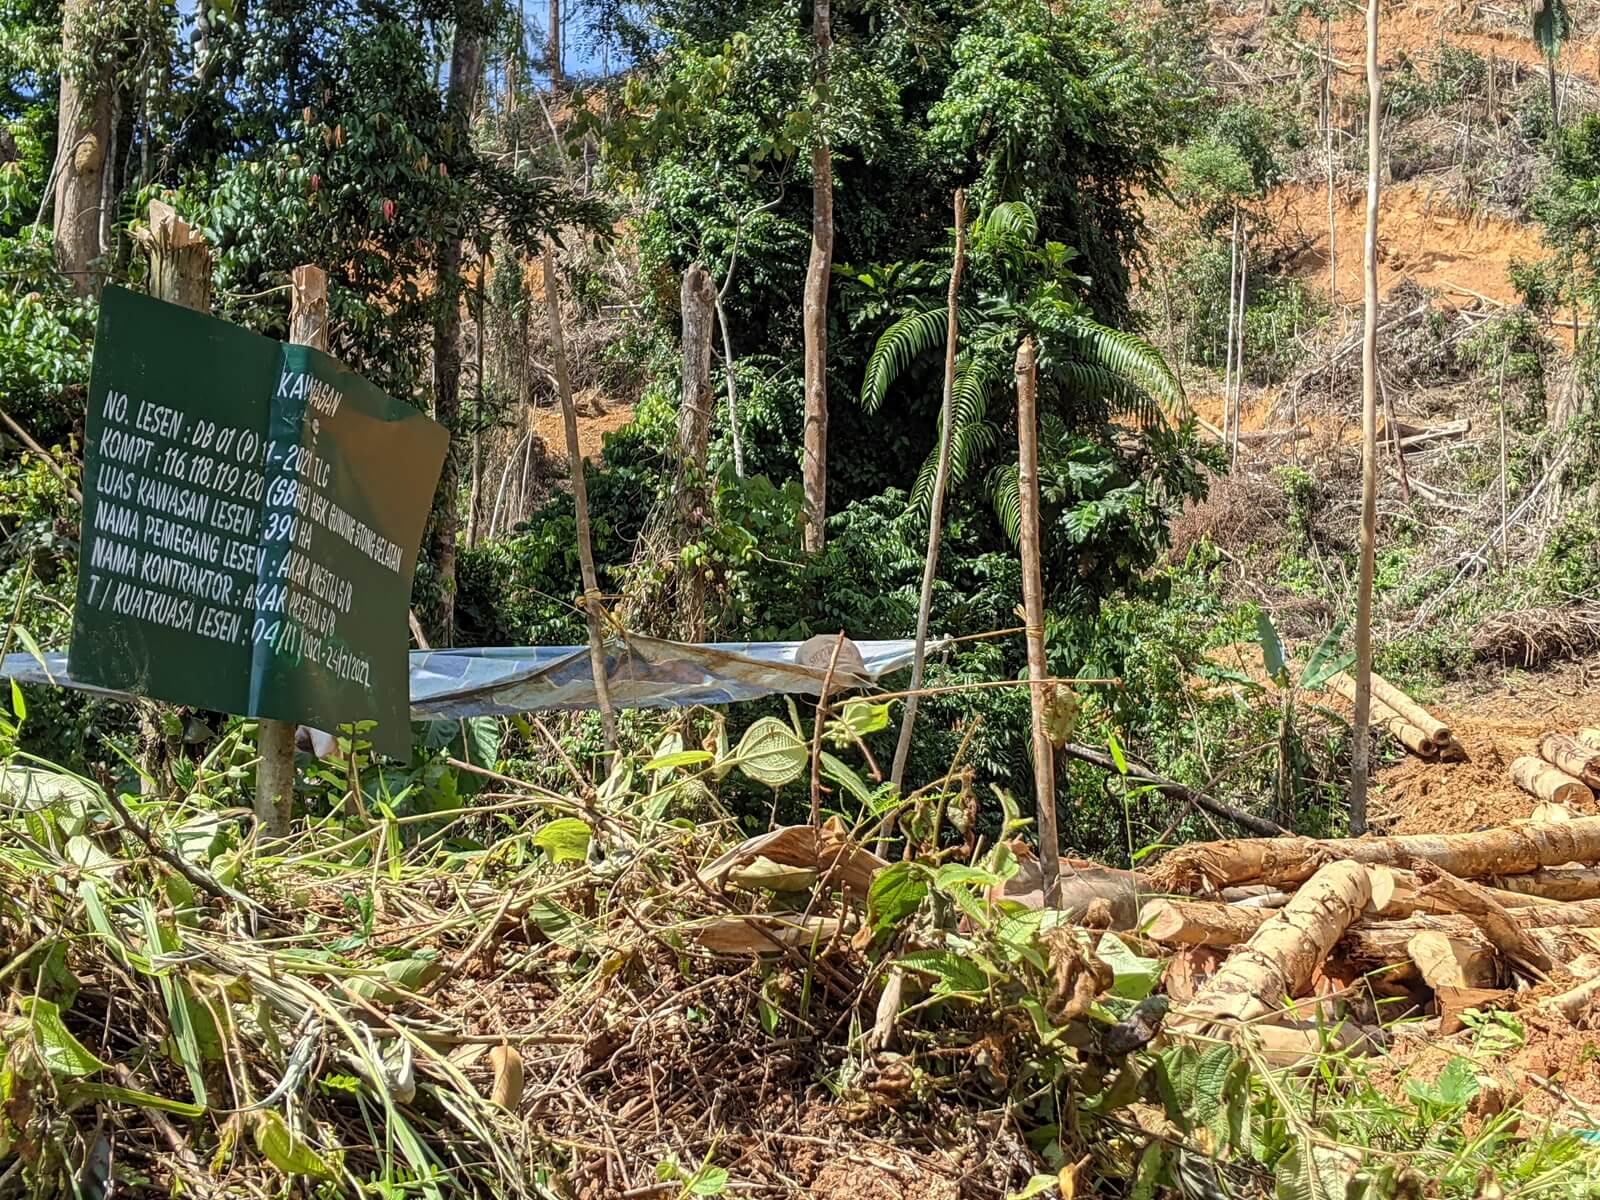 Akar Prestij Sdn Bhd has a permit to clear this site in the Gunung Stong Selatan Forest Reserve, Kelantan, for a rubber forest plantation. (YH Law)